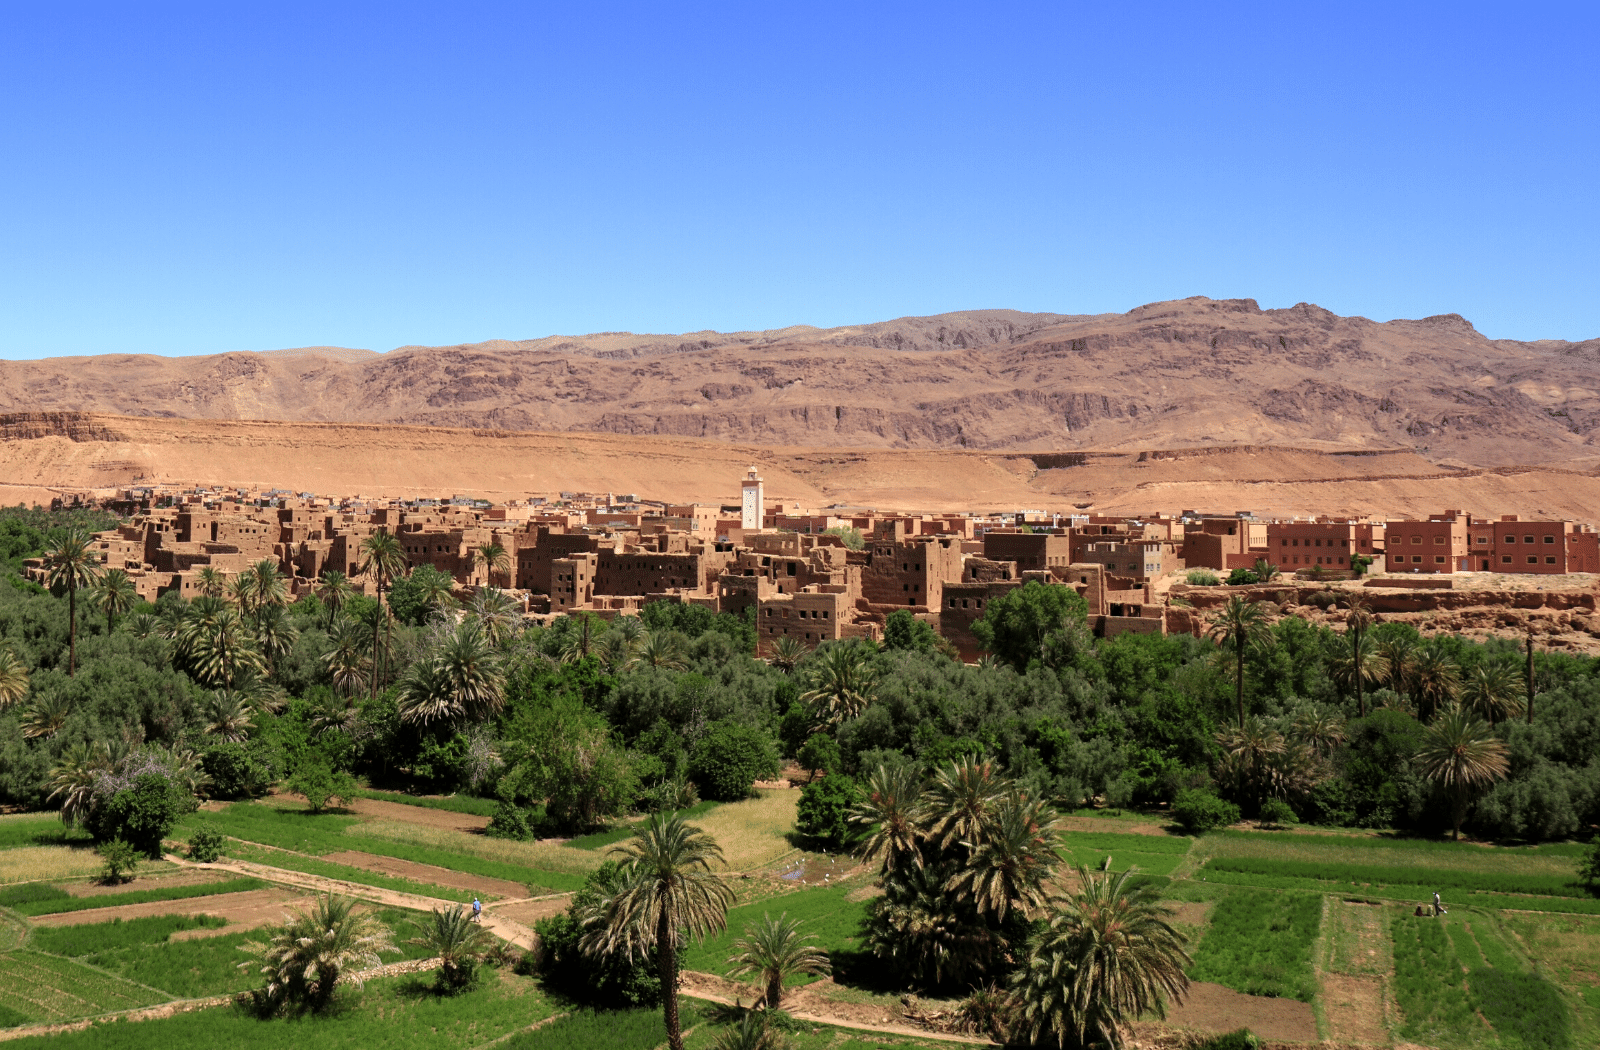 Dades Valley in Morocco